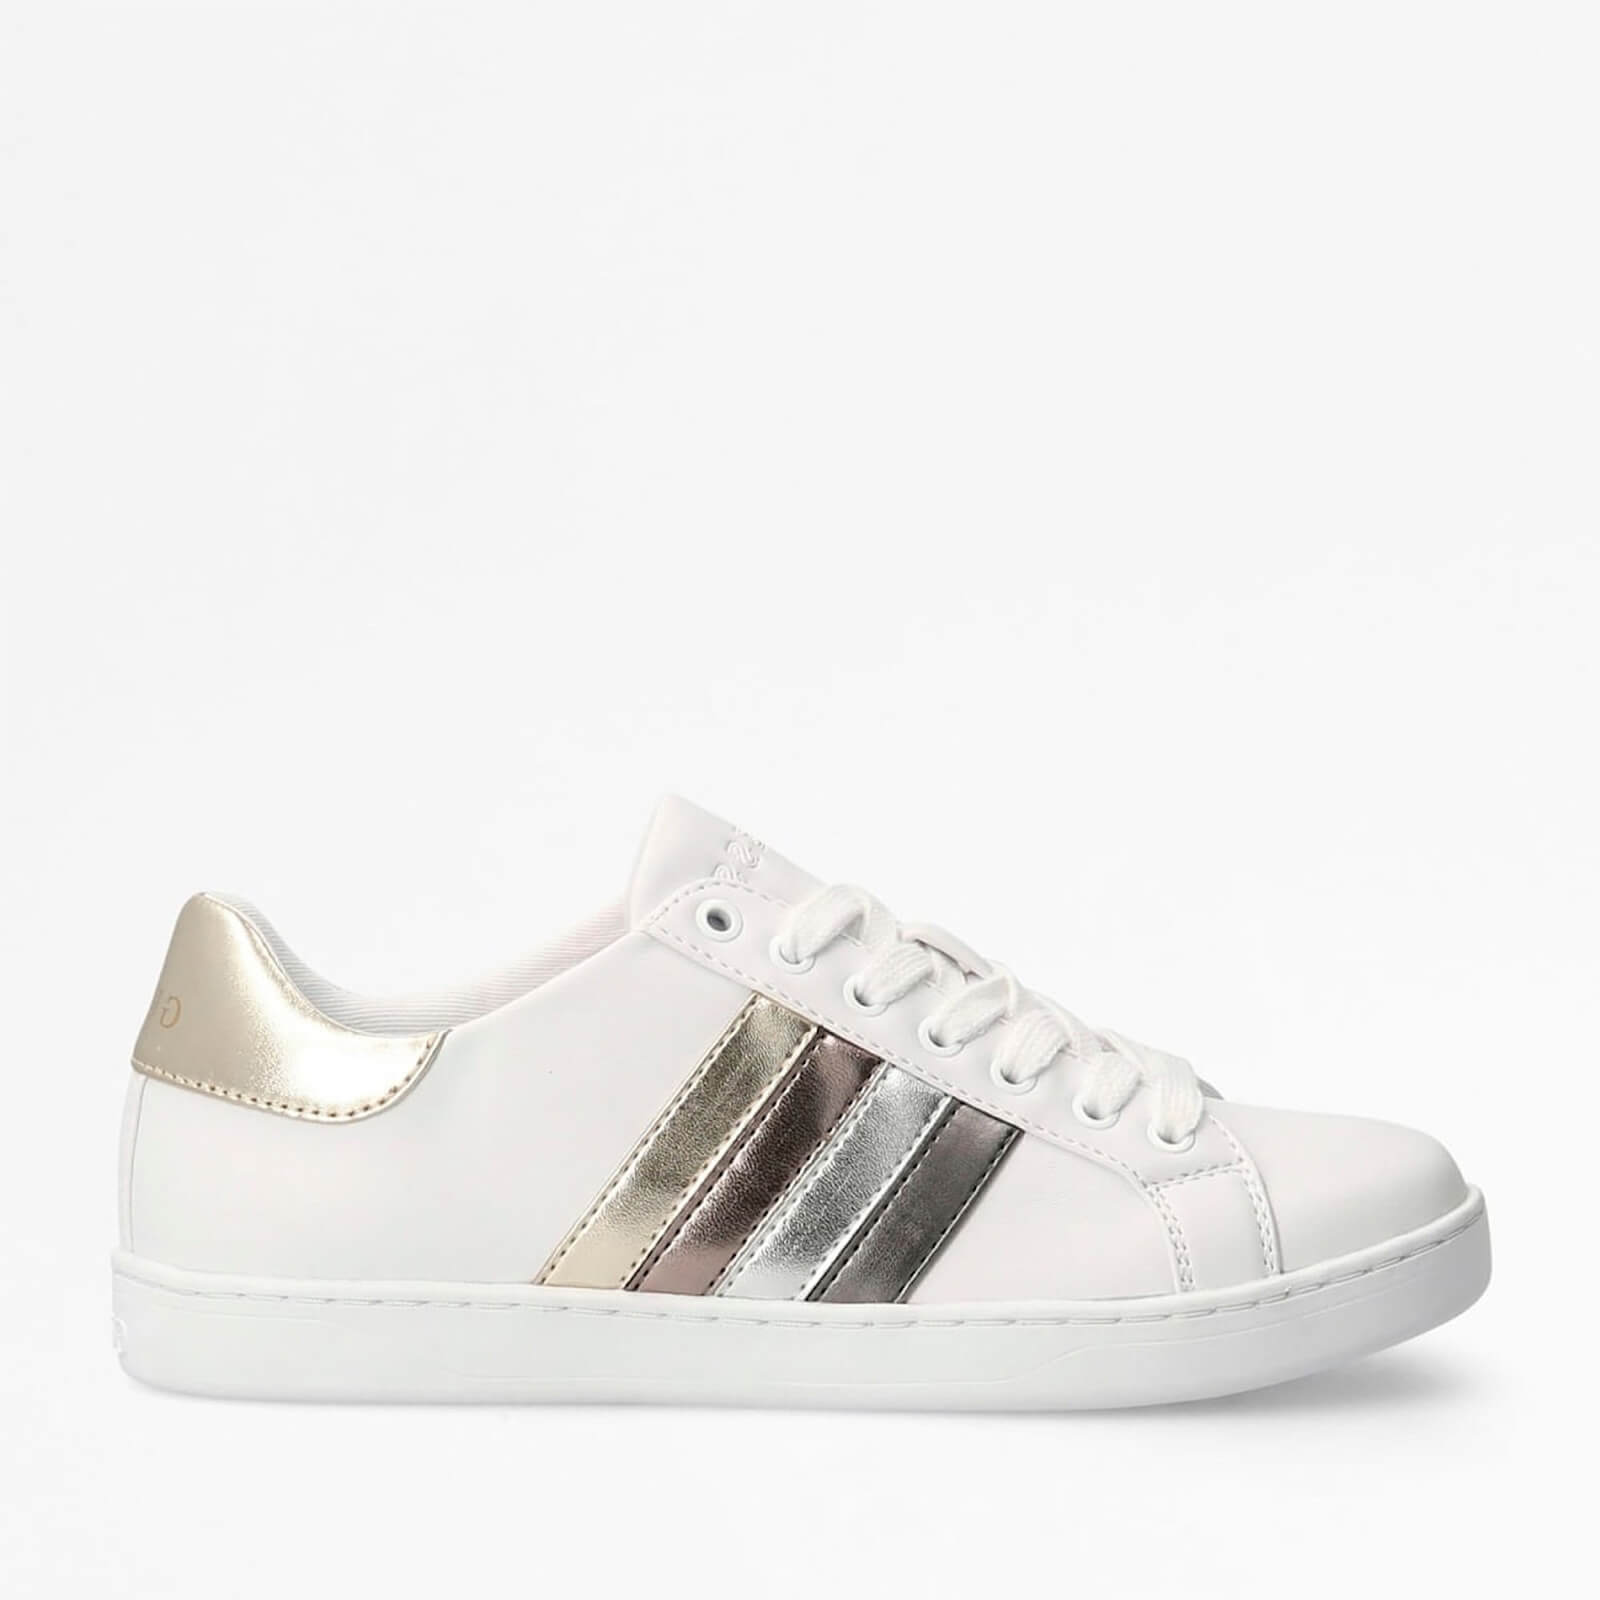 Guess Women's Jacobb Leather Cupsole Trainers - White/Platino - Uk 3